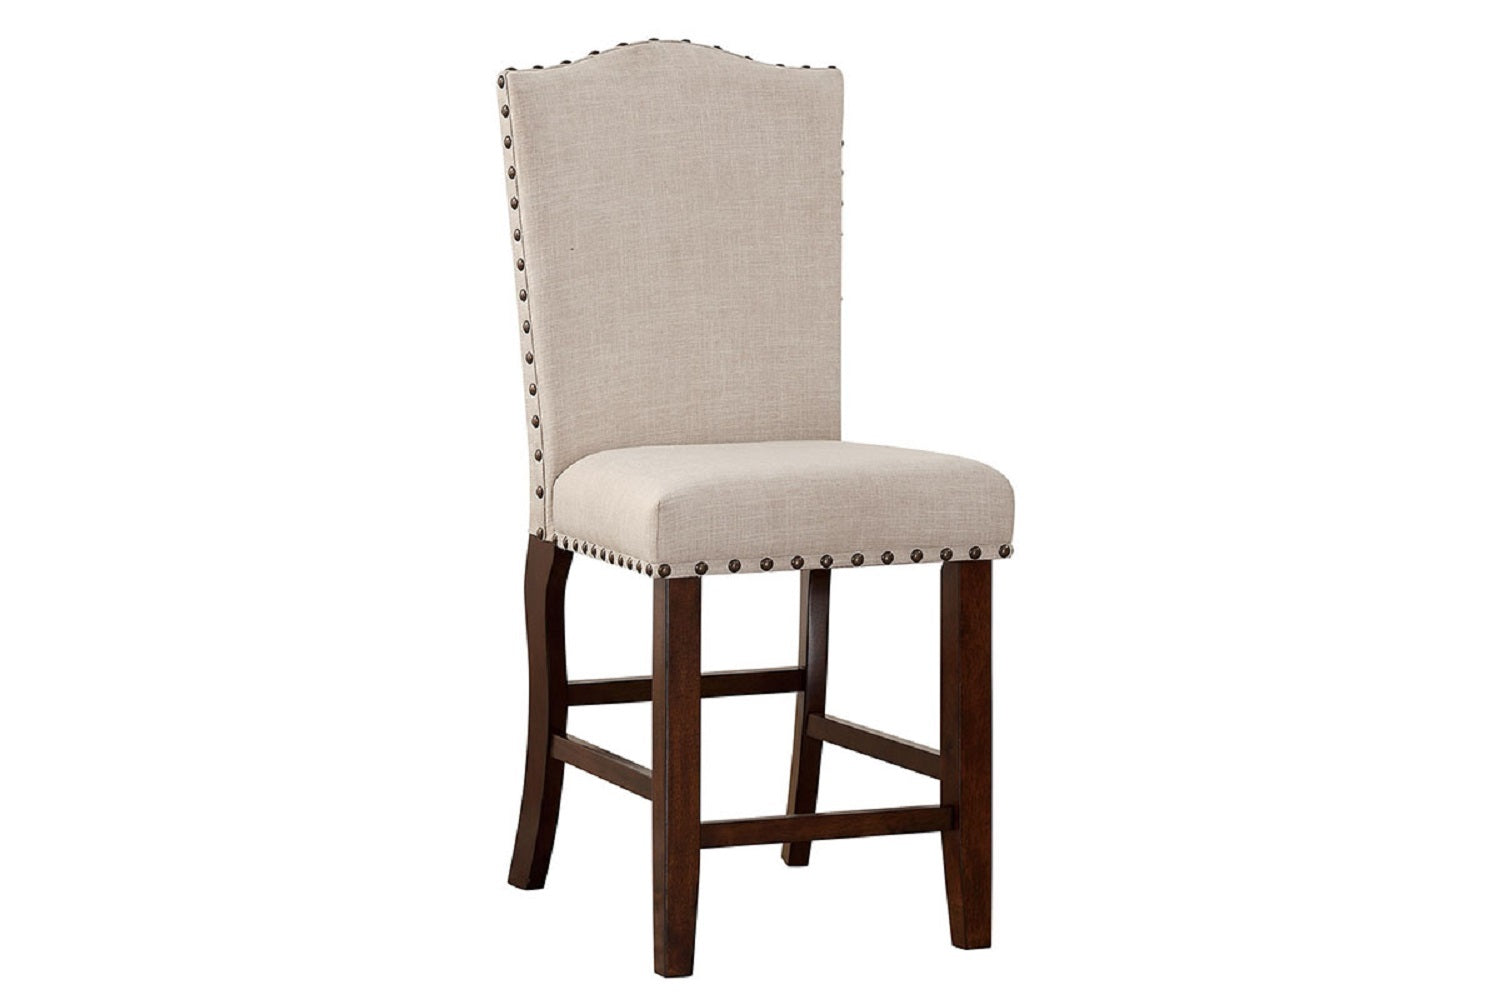 Classic Cream Upholstered Cushion Chairs Set of 2pc cream-brown-dining room-classic-modern-dining